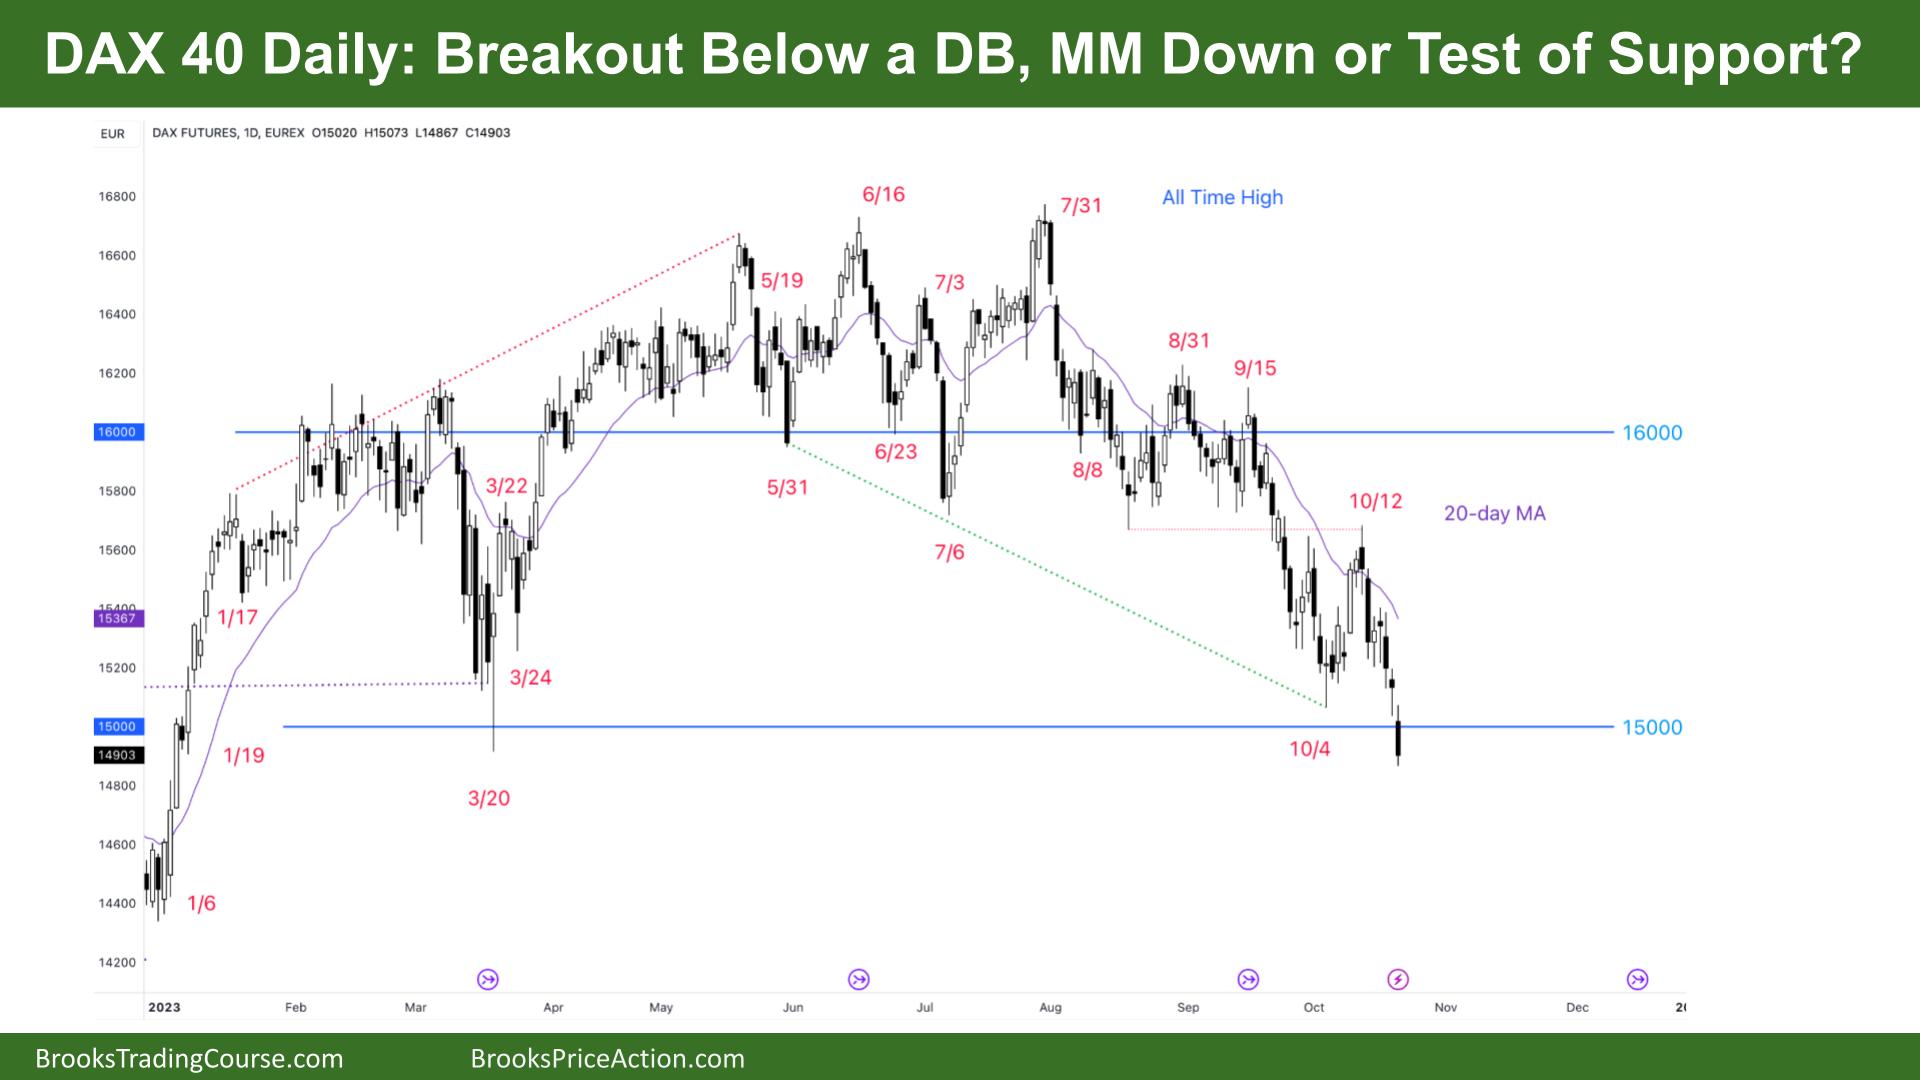 DAX 40 Breakout Below a DB, MM Down or Test of Support?